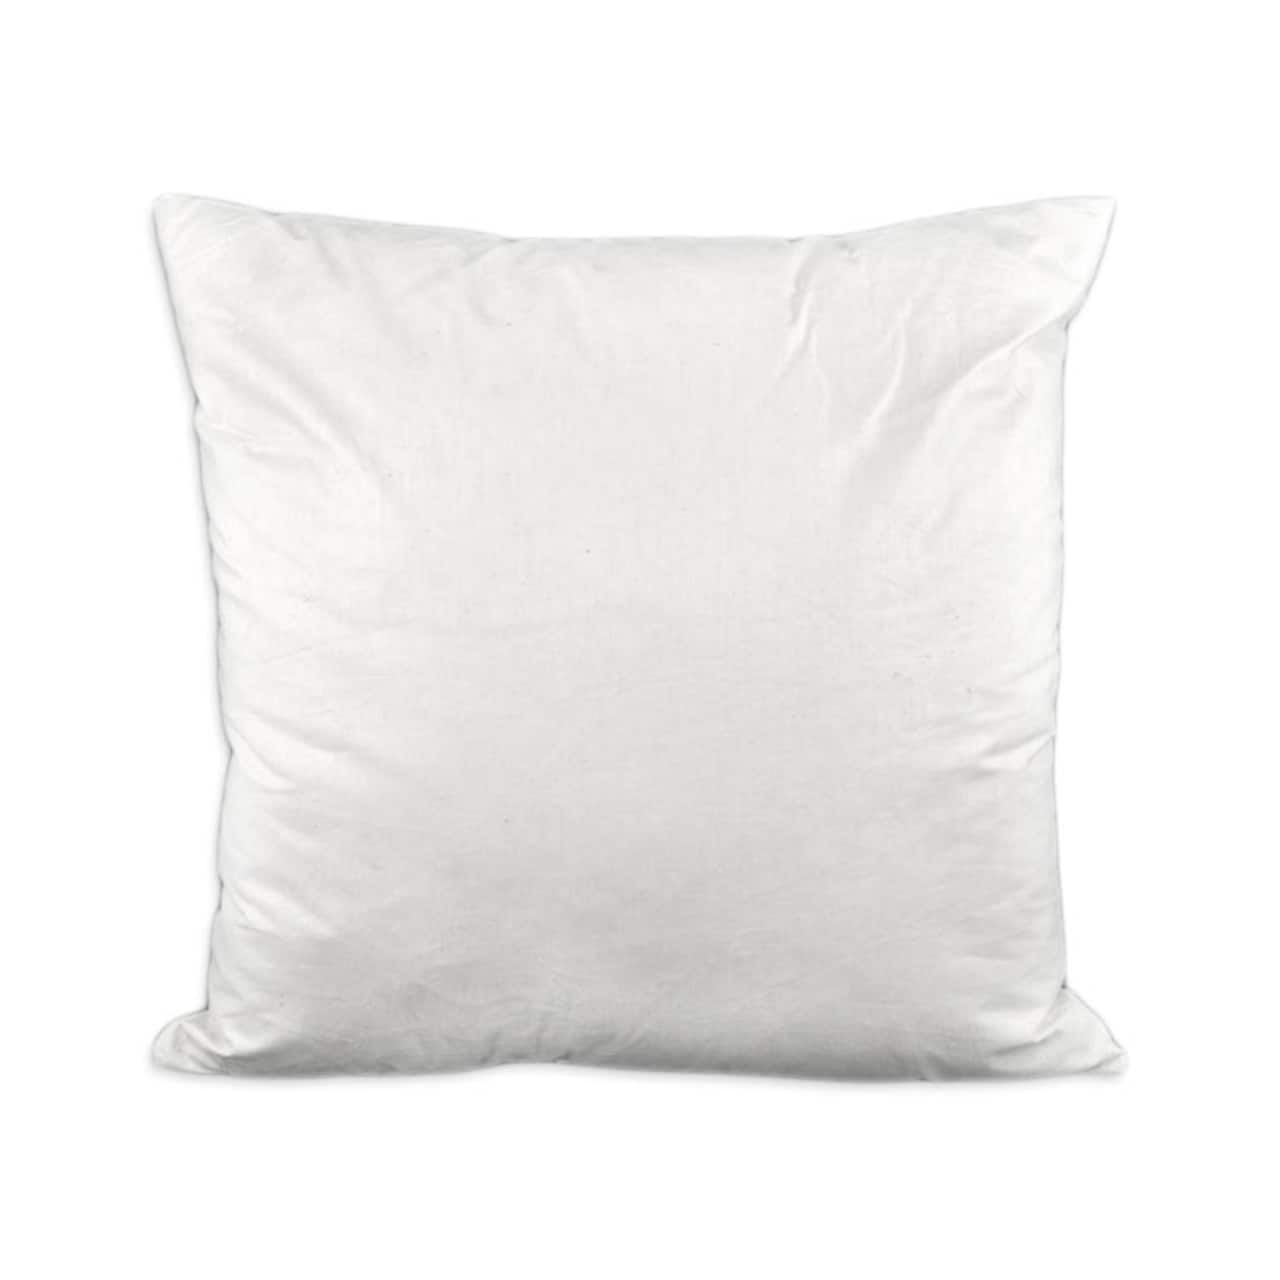 16 x 16 Down Pillow Form - 50/50